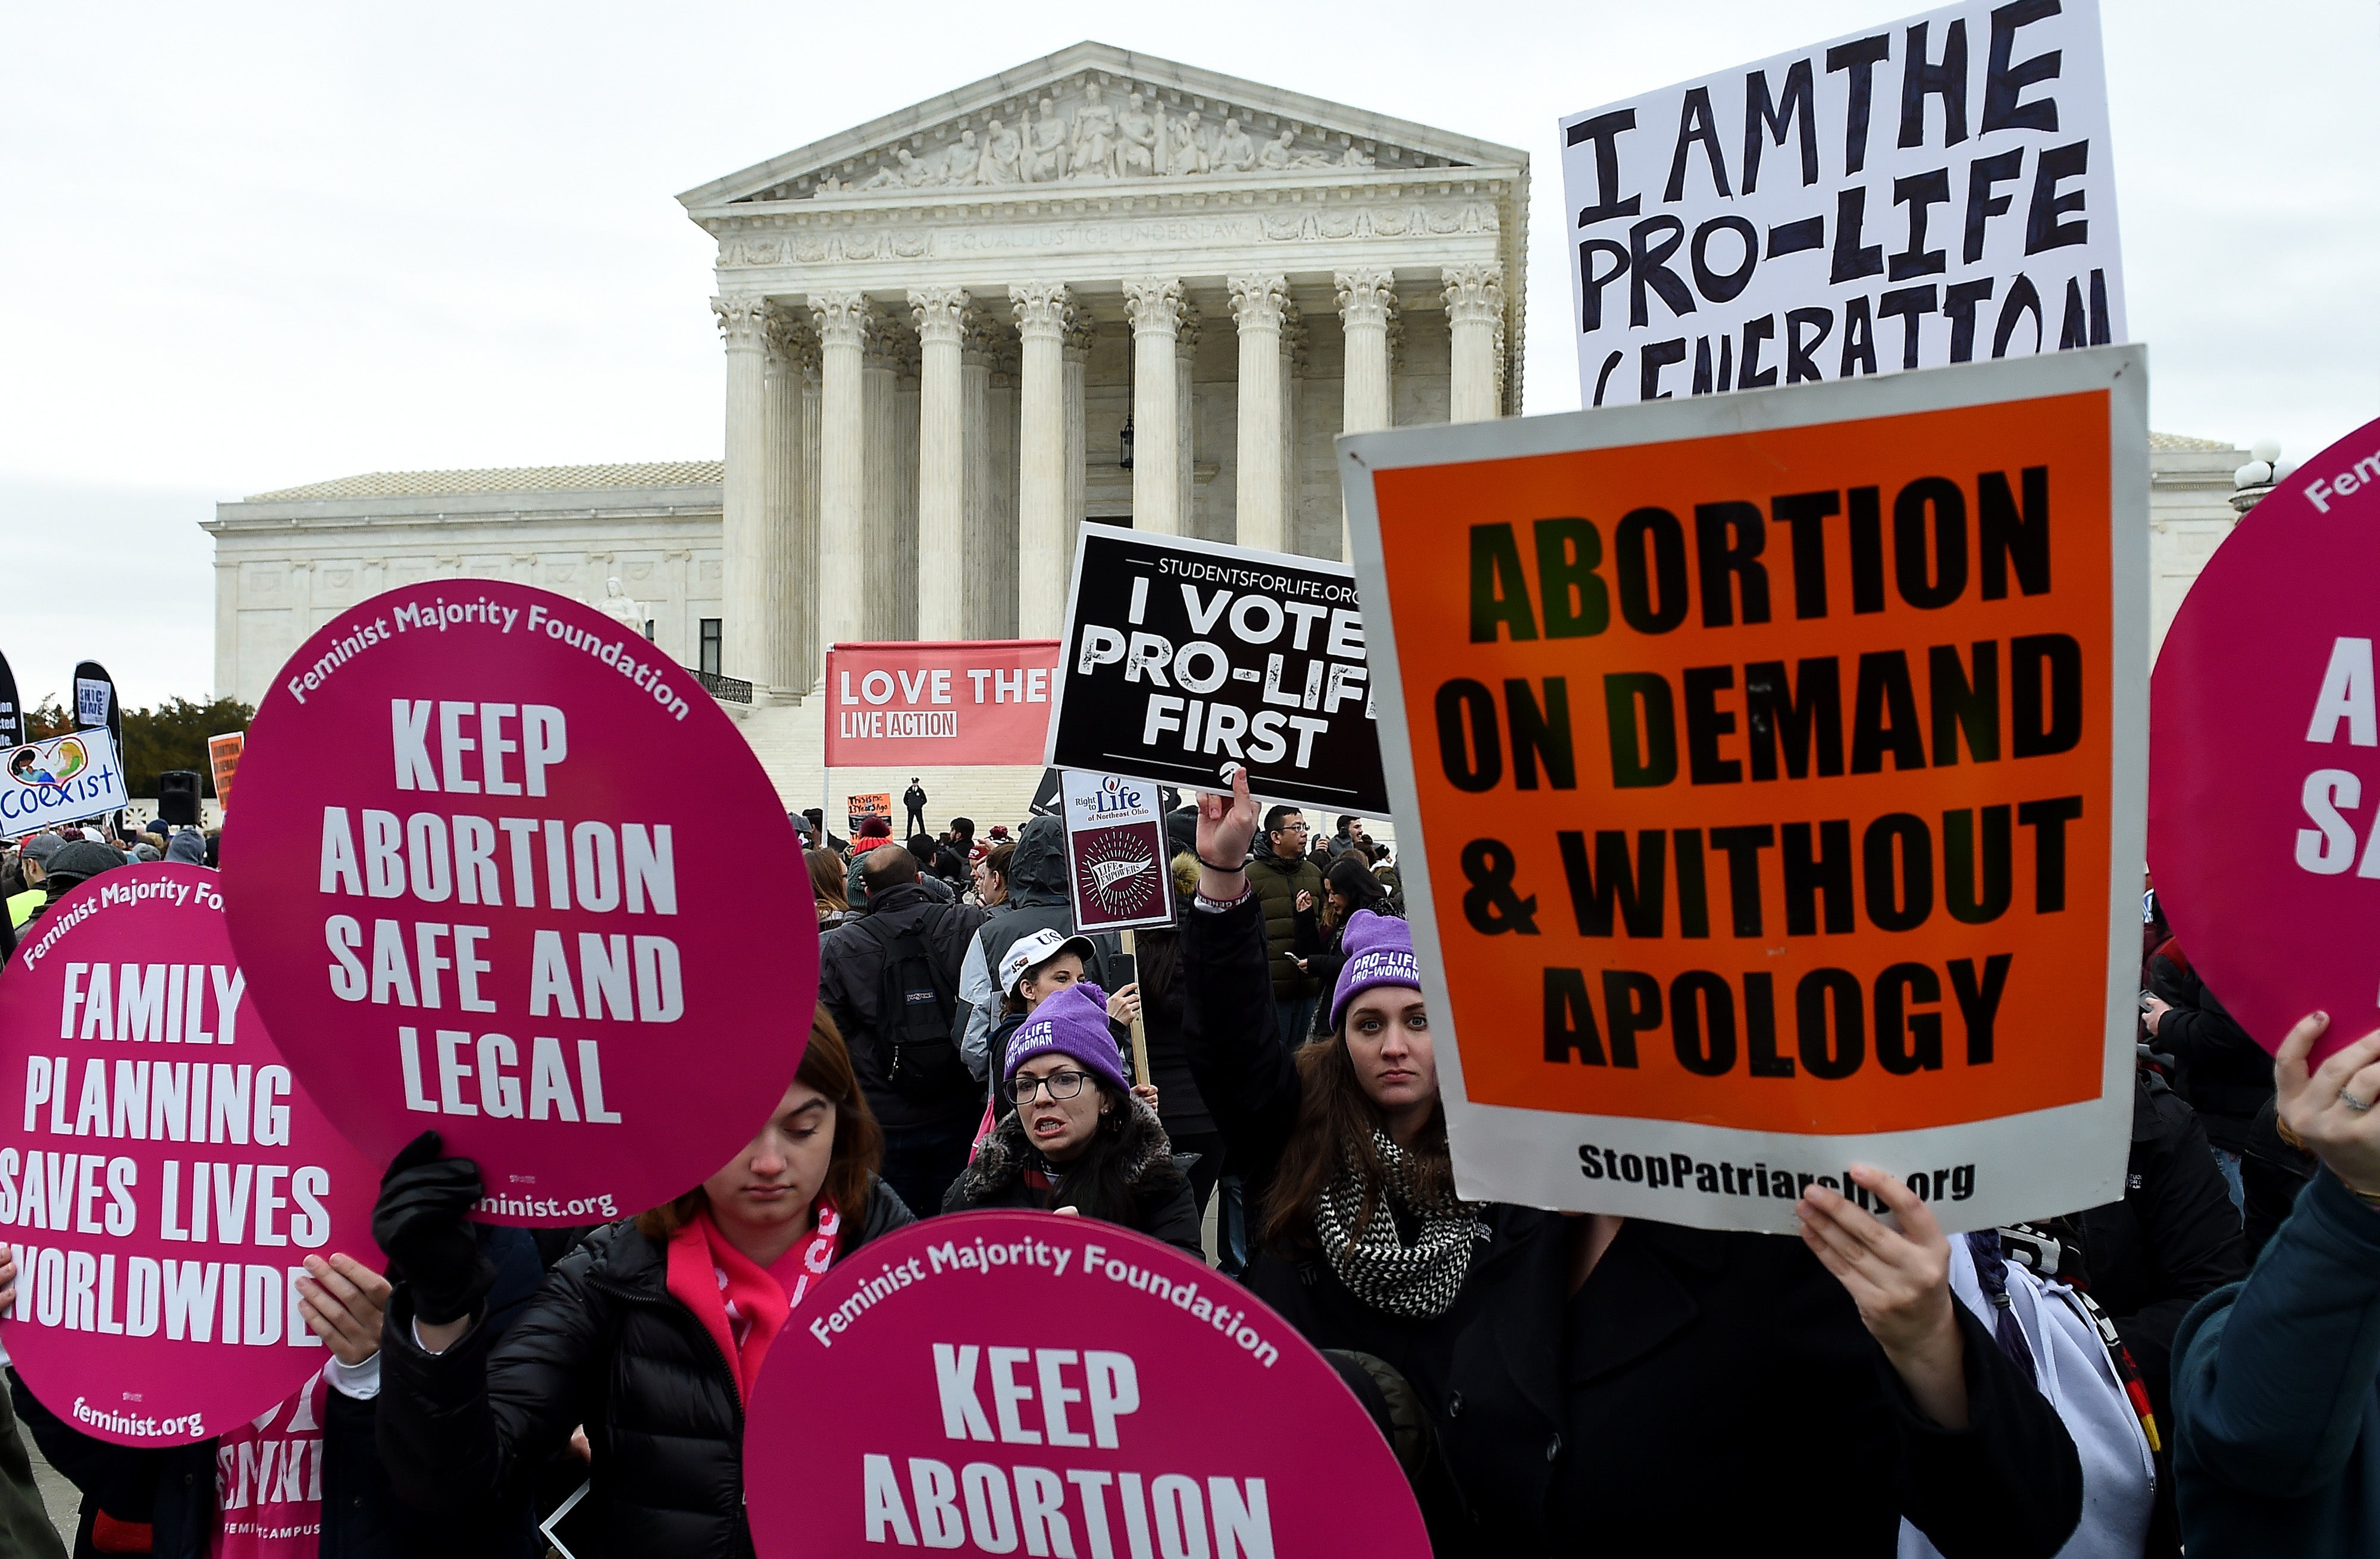 Legal abortion access could effectively end for women in much of the American South and Midwest, analysis suggested